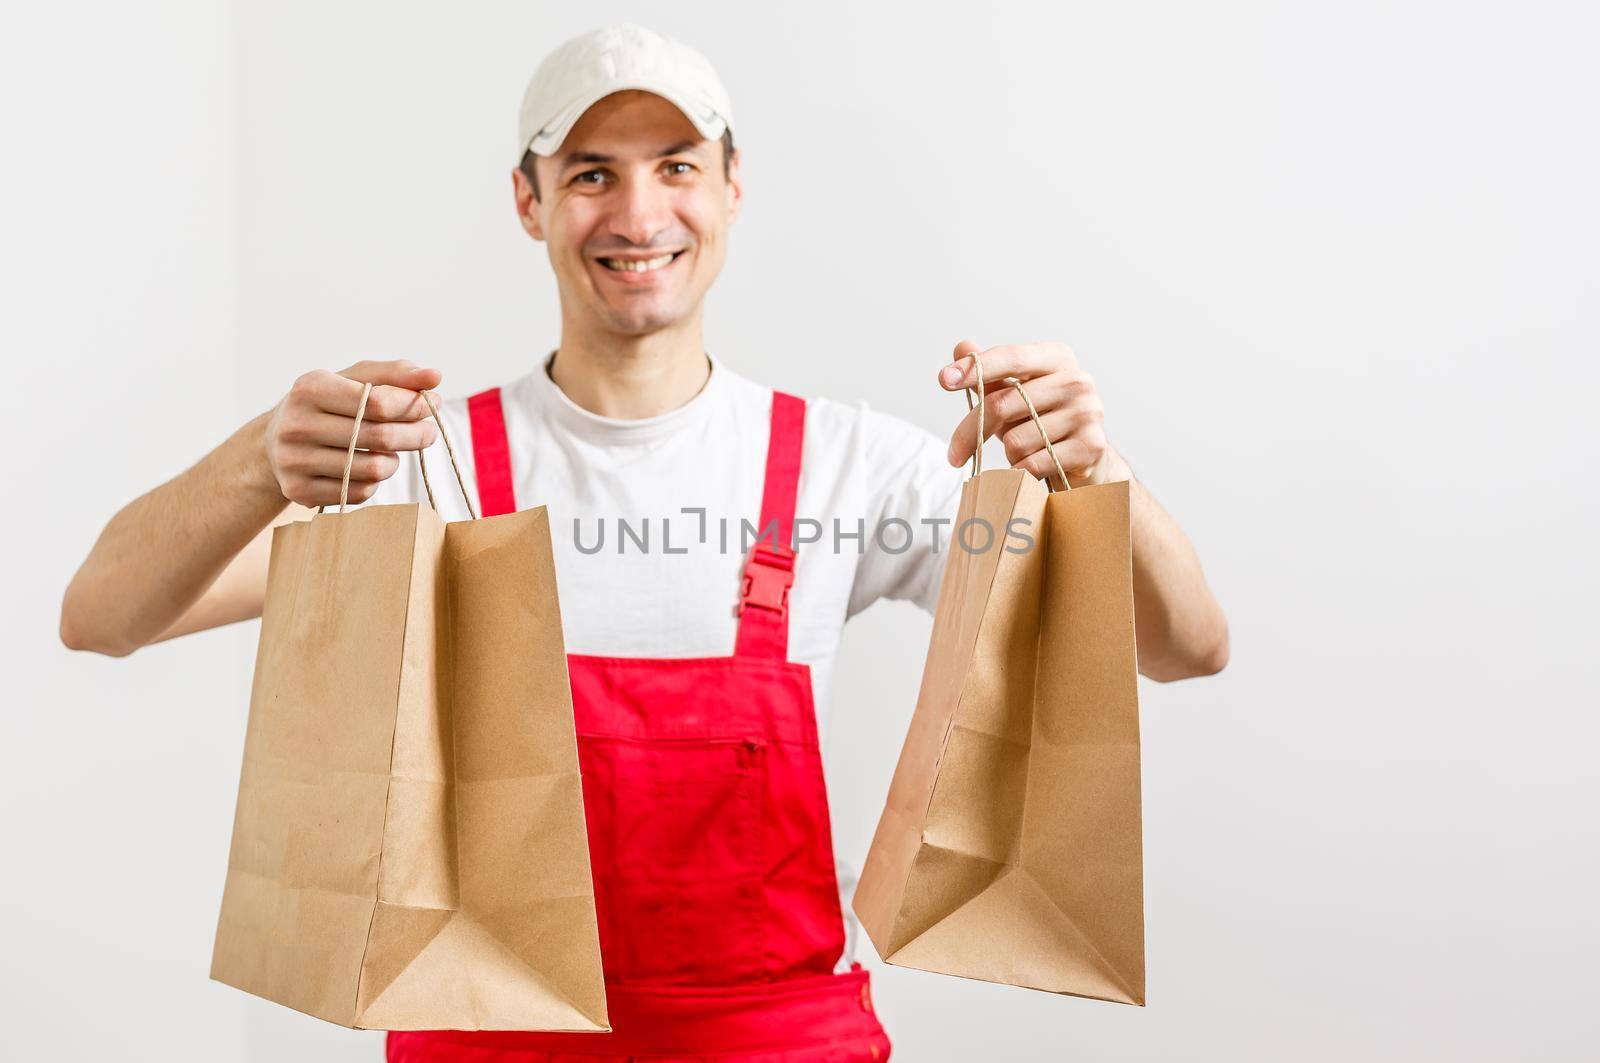 Diverse of paper containers for takeaway food. Delivery man is carrying